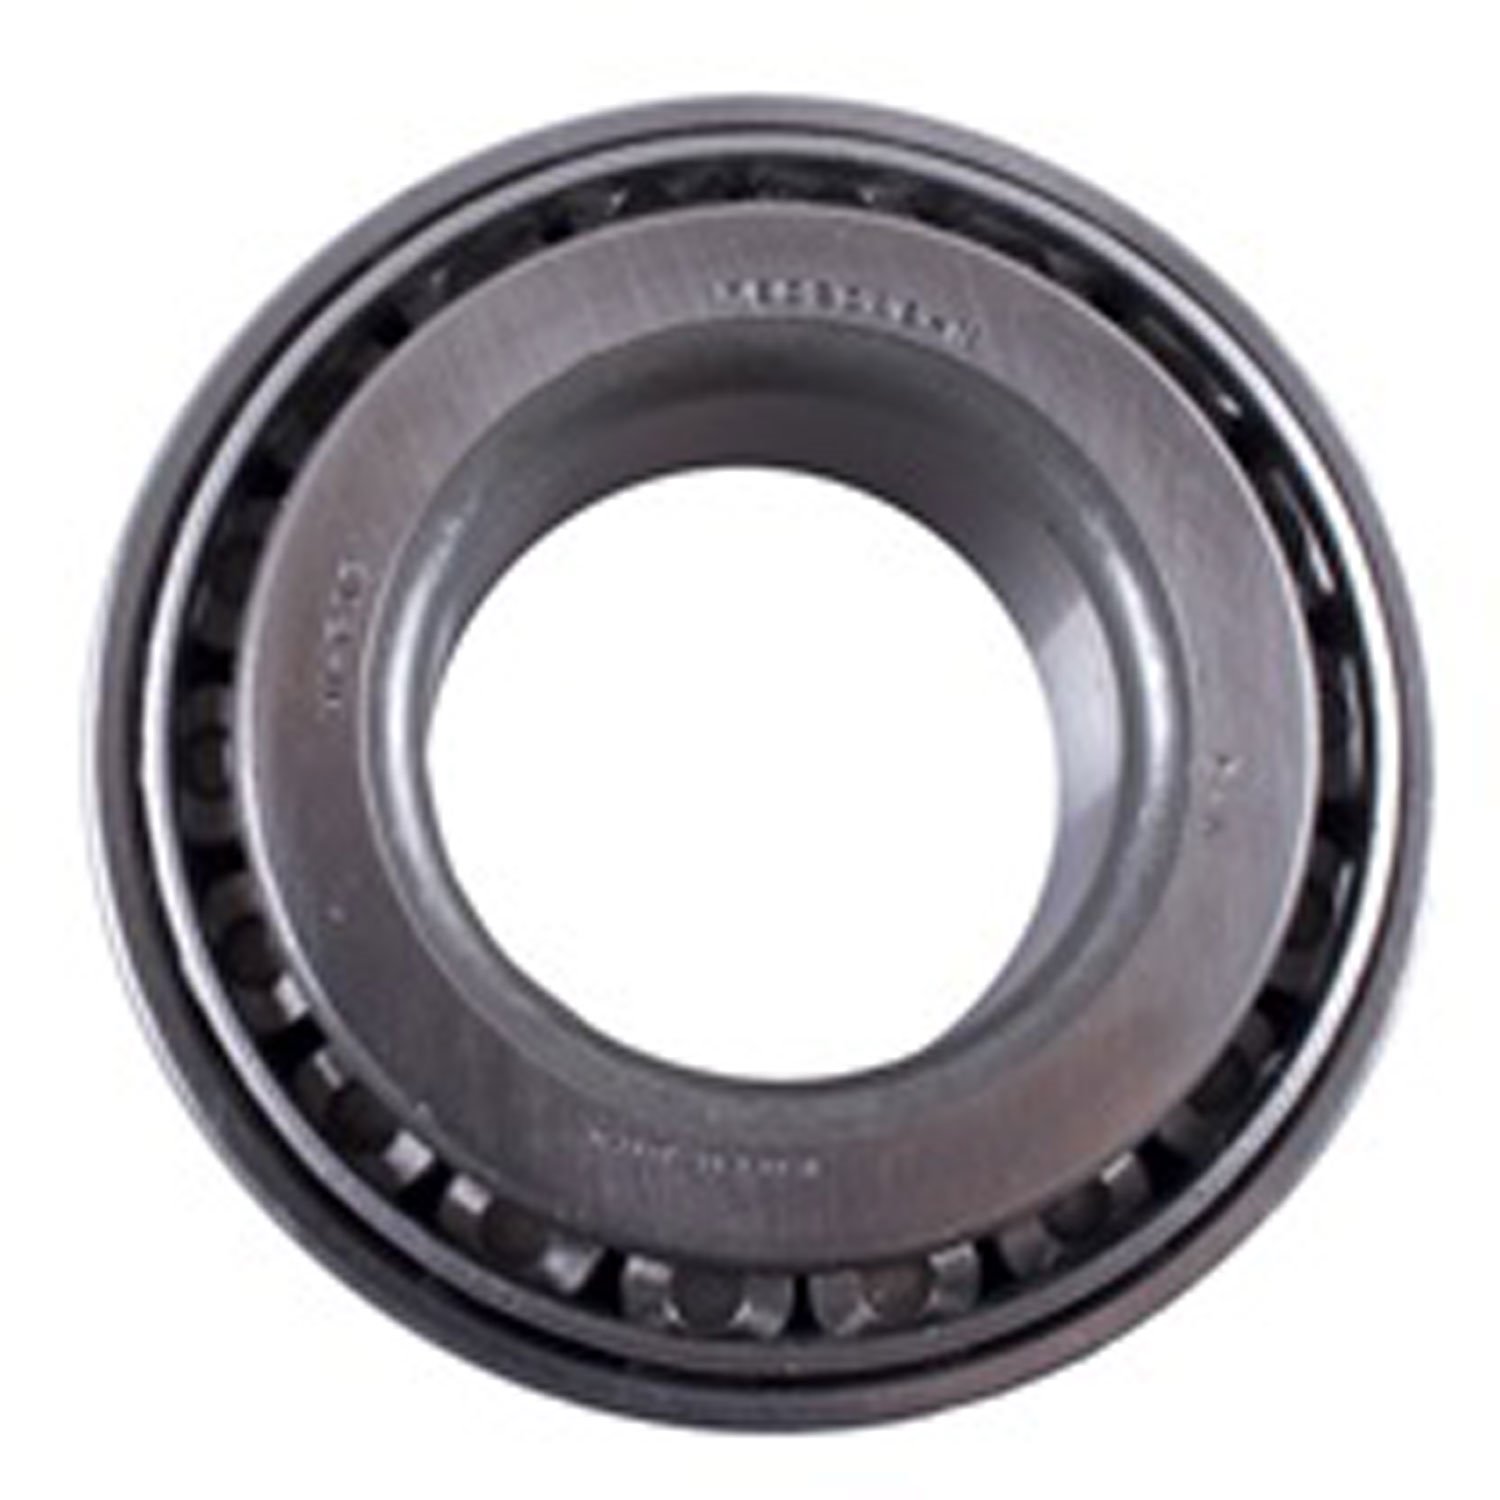 This inner pinion bearing from Omix-ADA for Dana